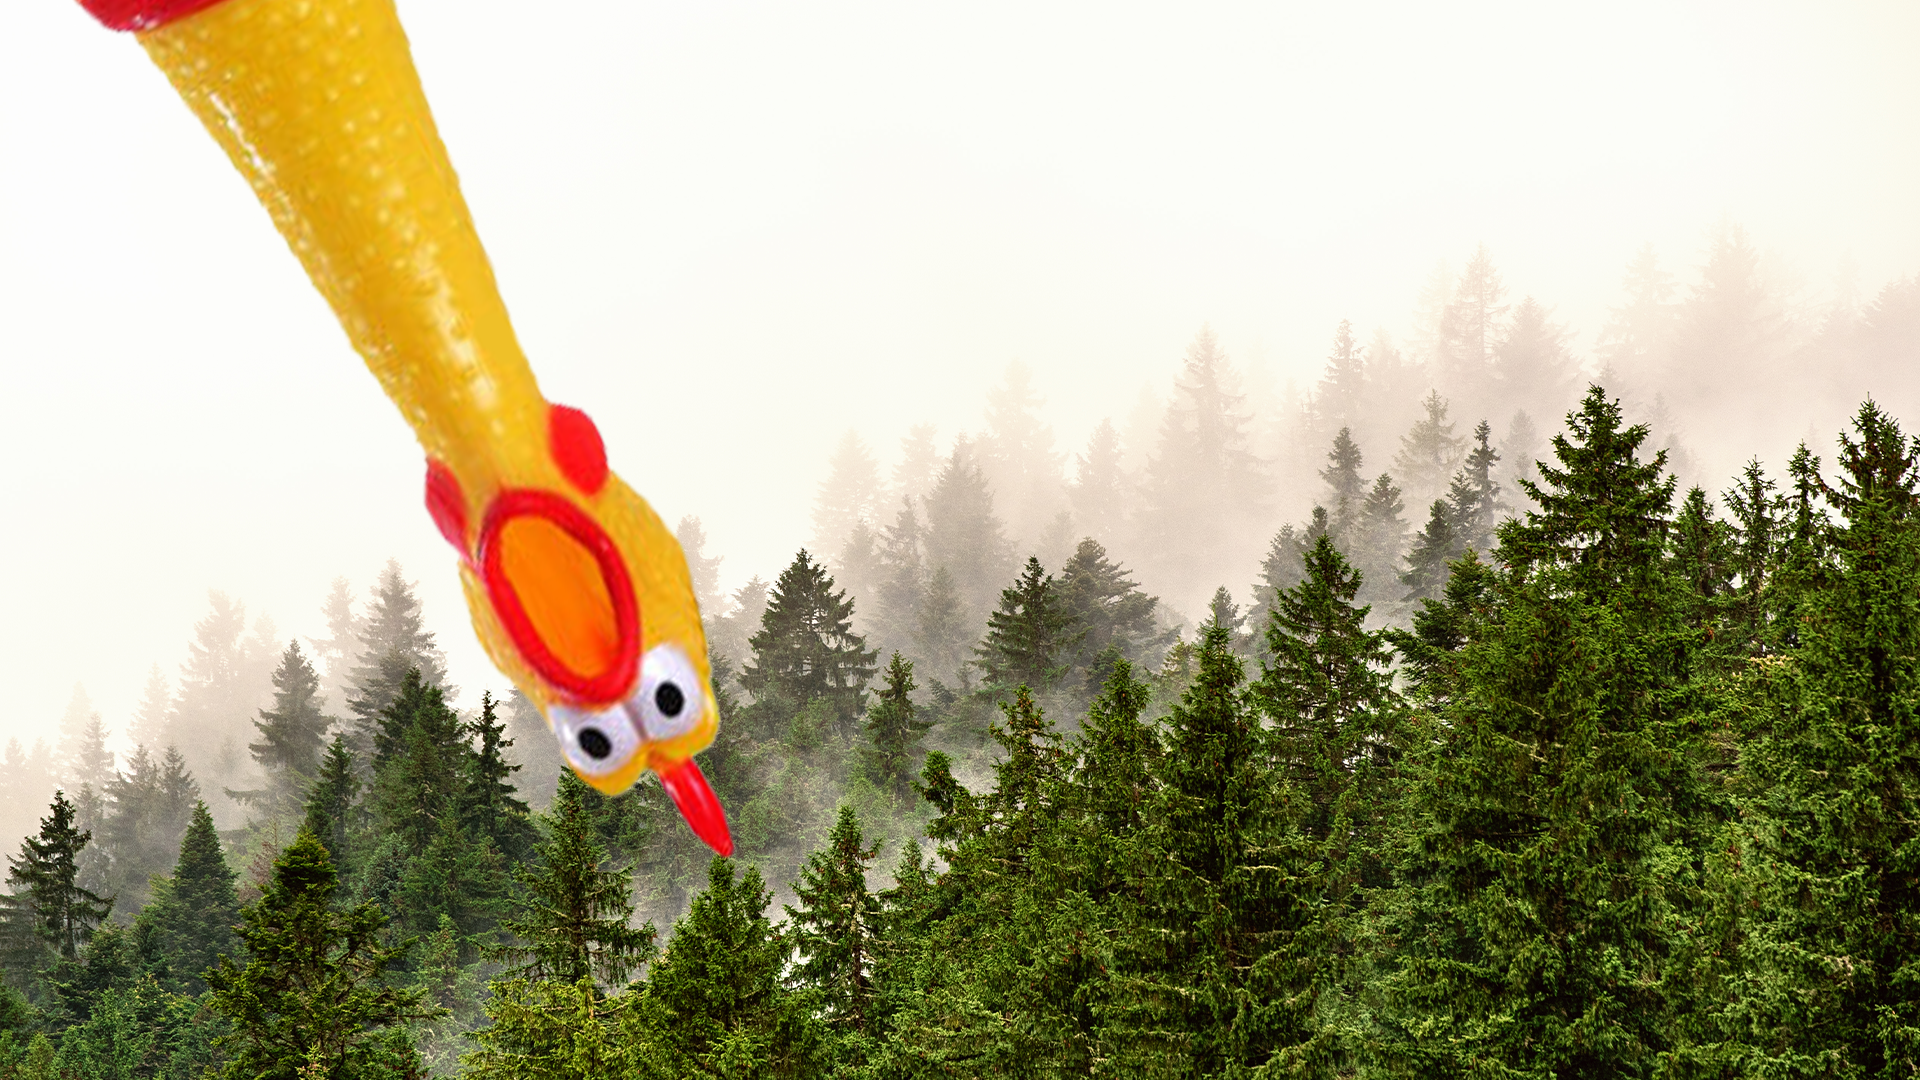 Pine trees and rubber chicken